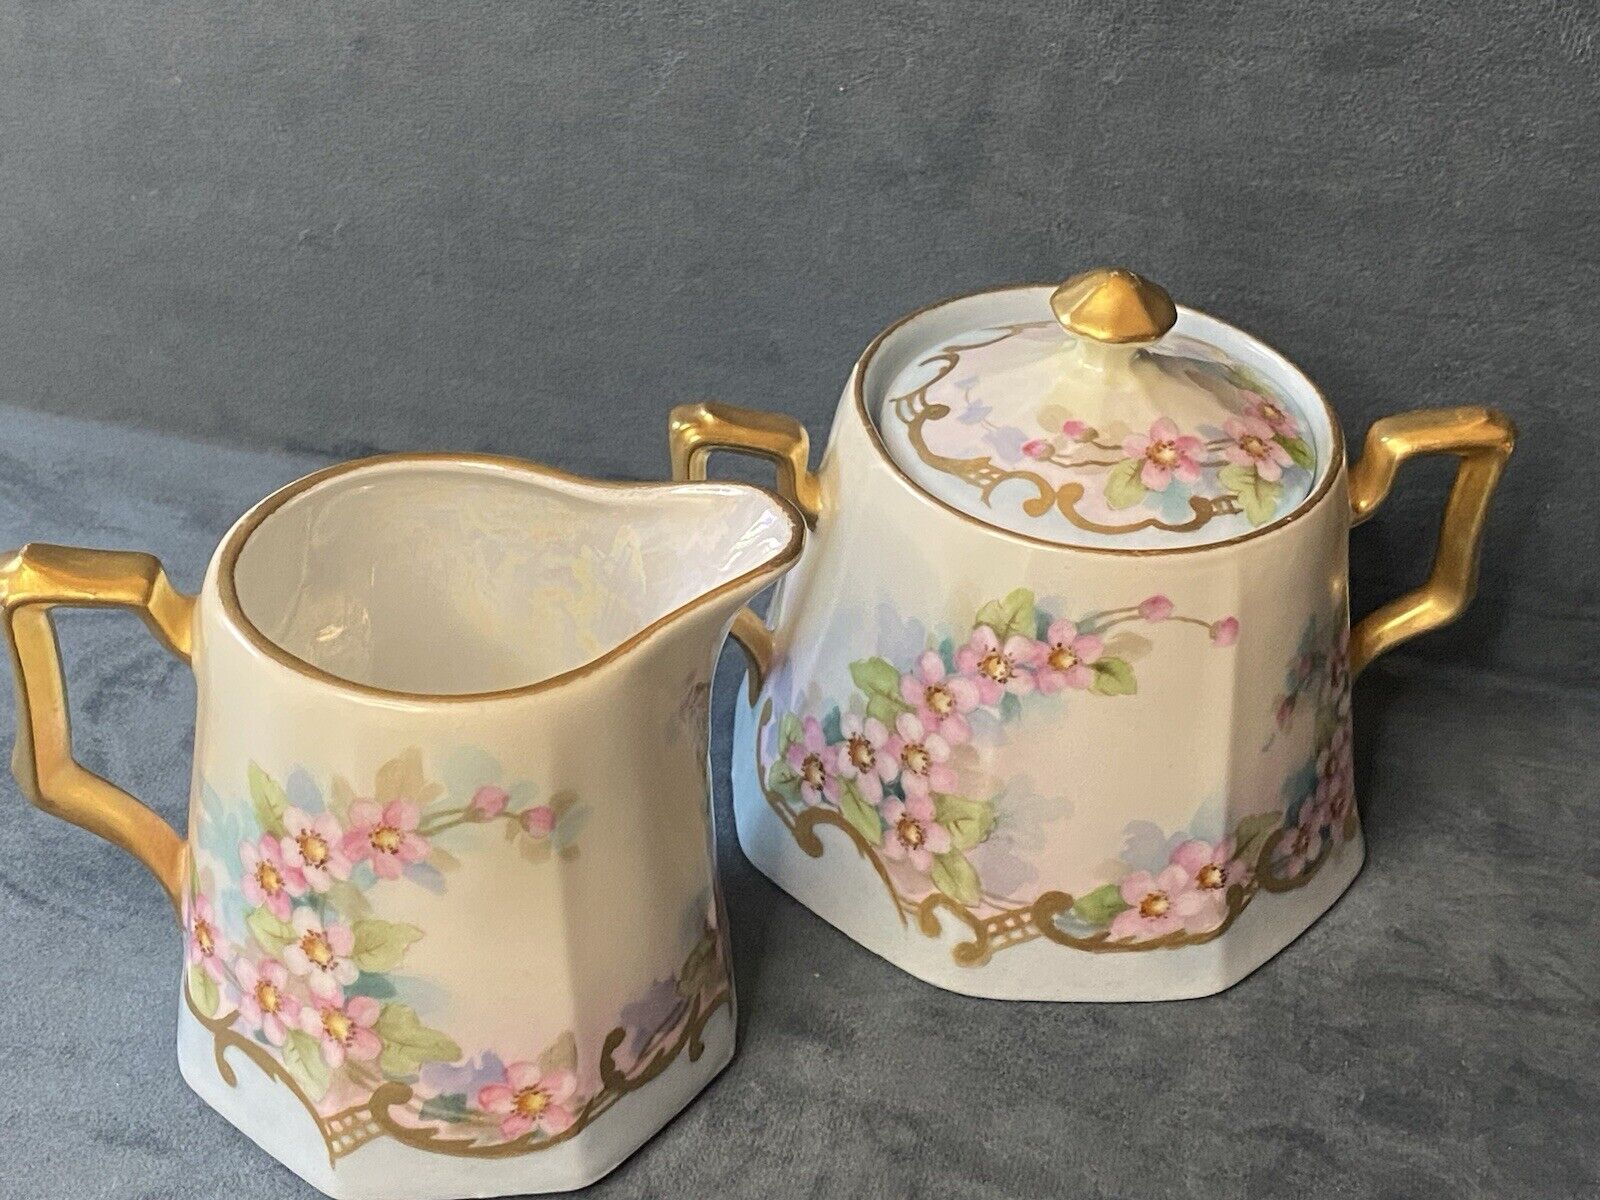 Antique Handpainted, Floral, Pink And Blue W/Gold Trim Cream And Sugar Set 3.5”